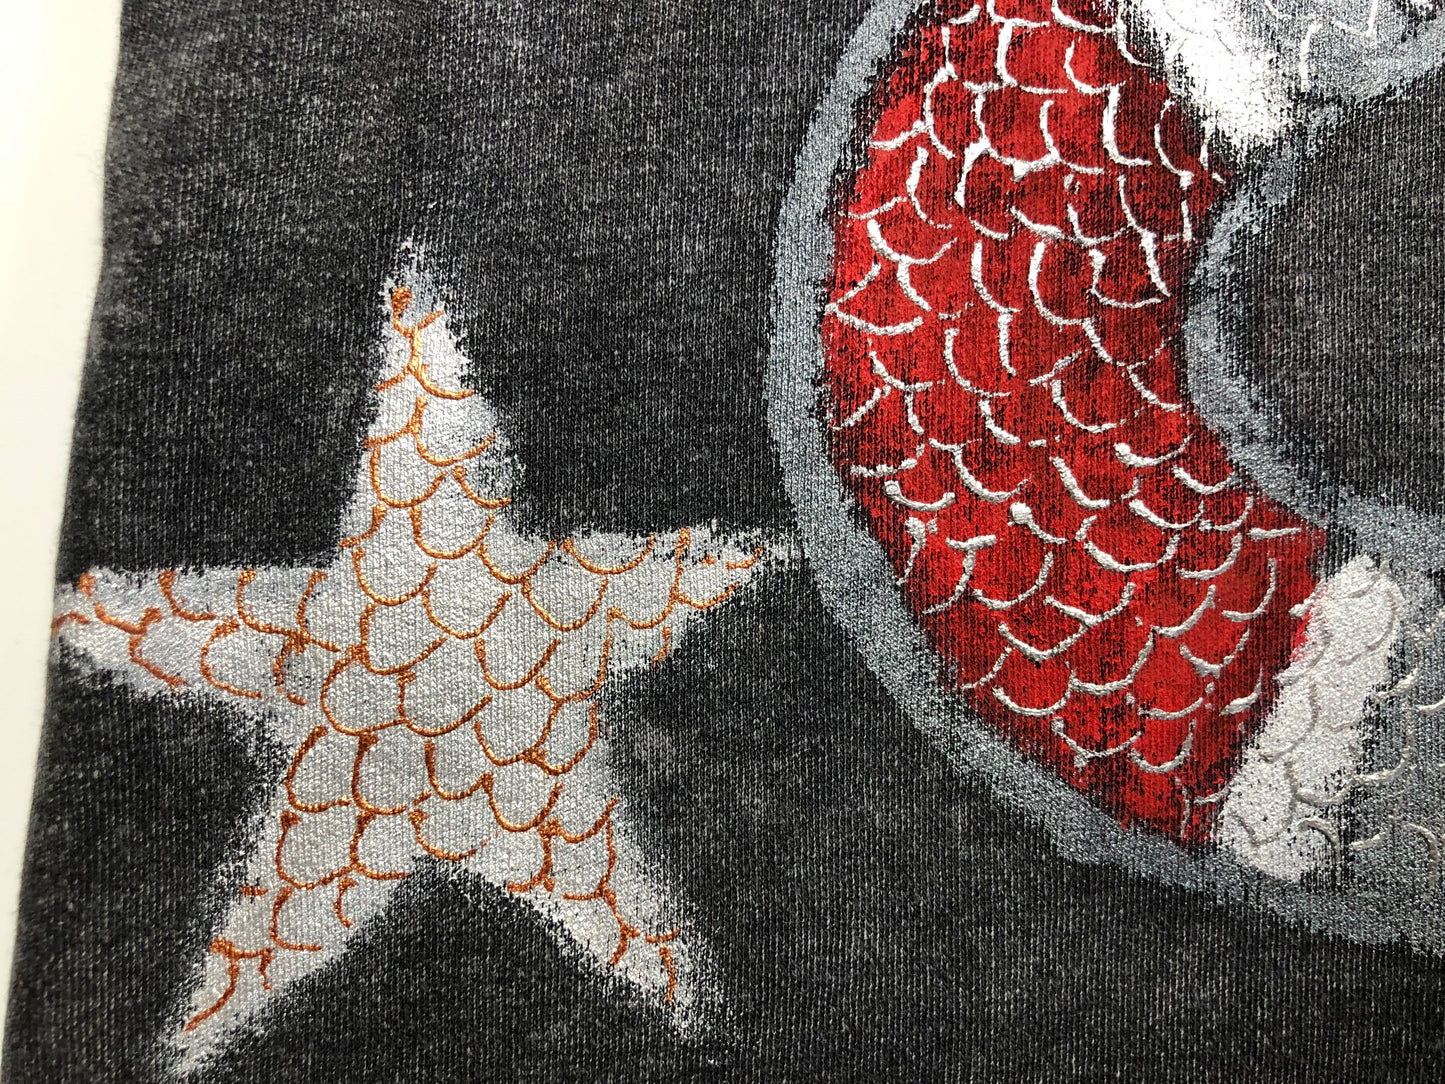 Detailed silver star with bronze scales and red snake on a women's t-shirt